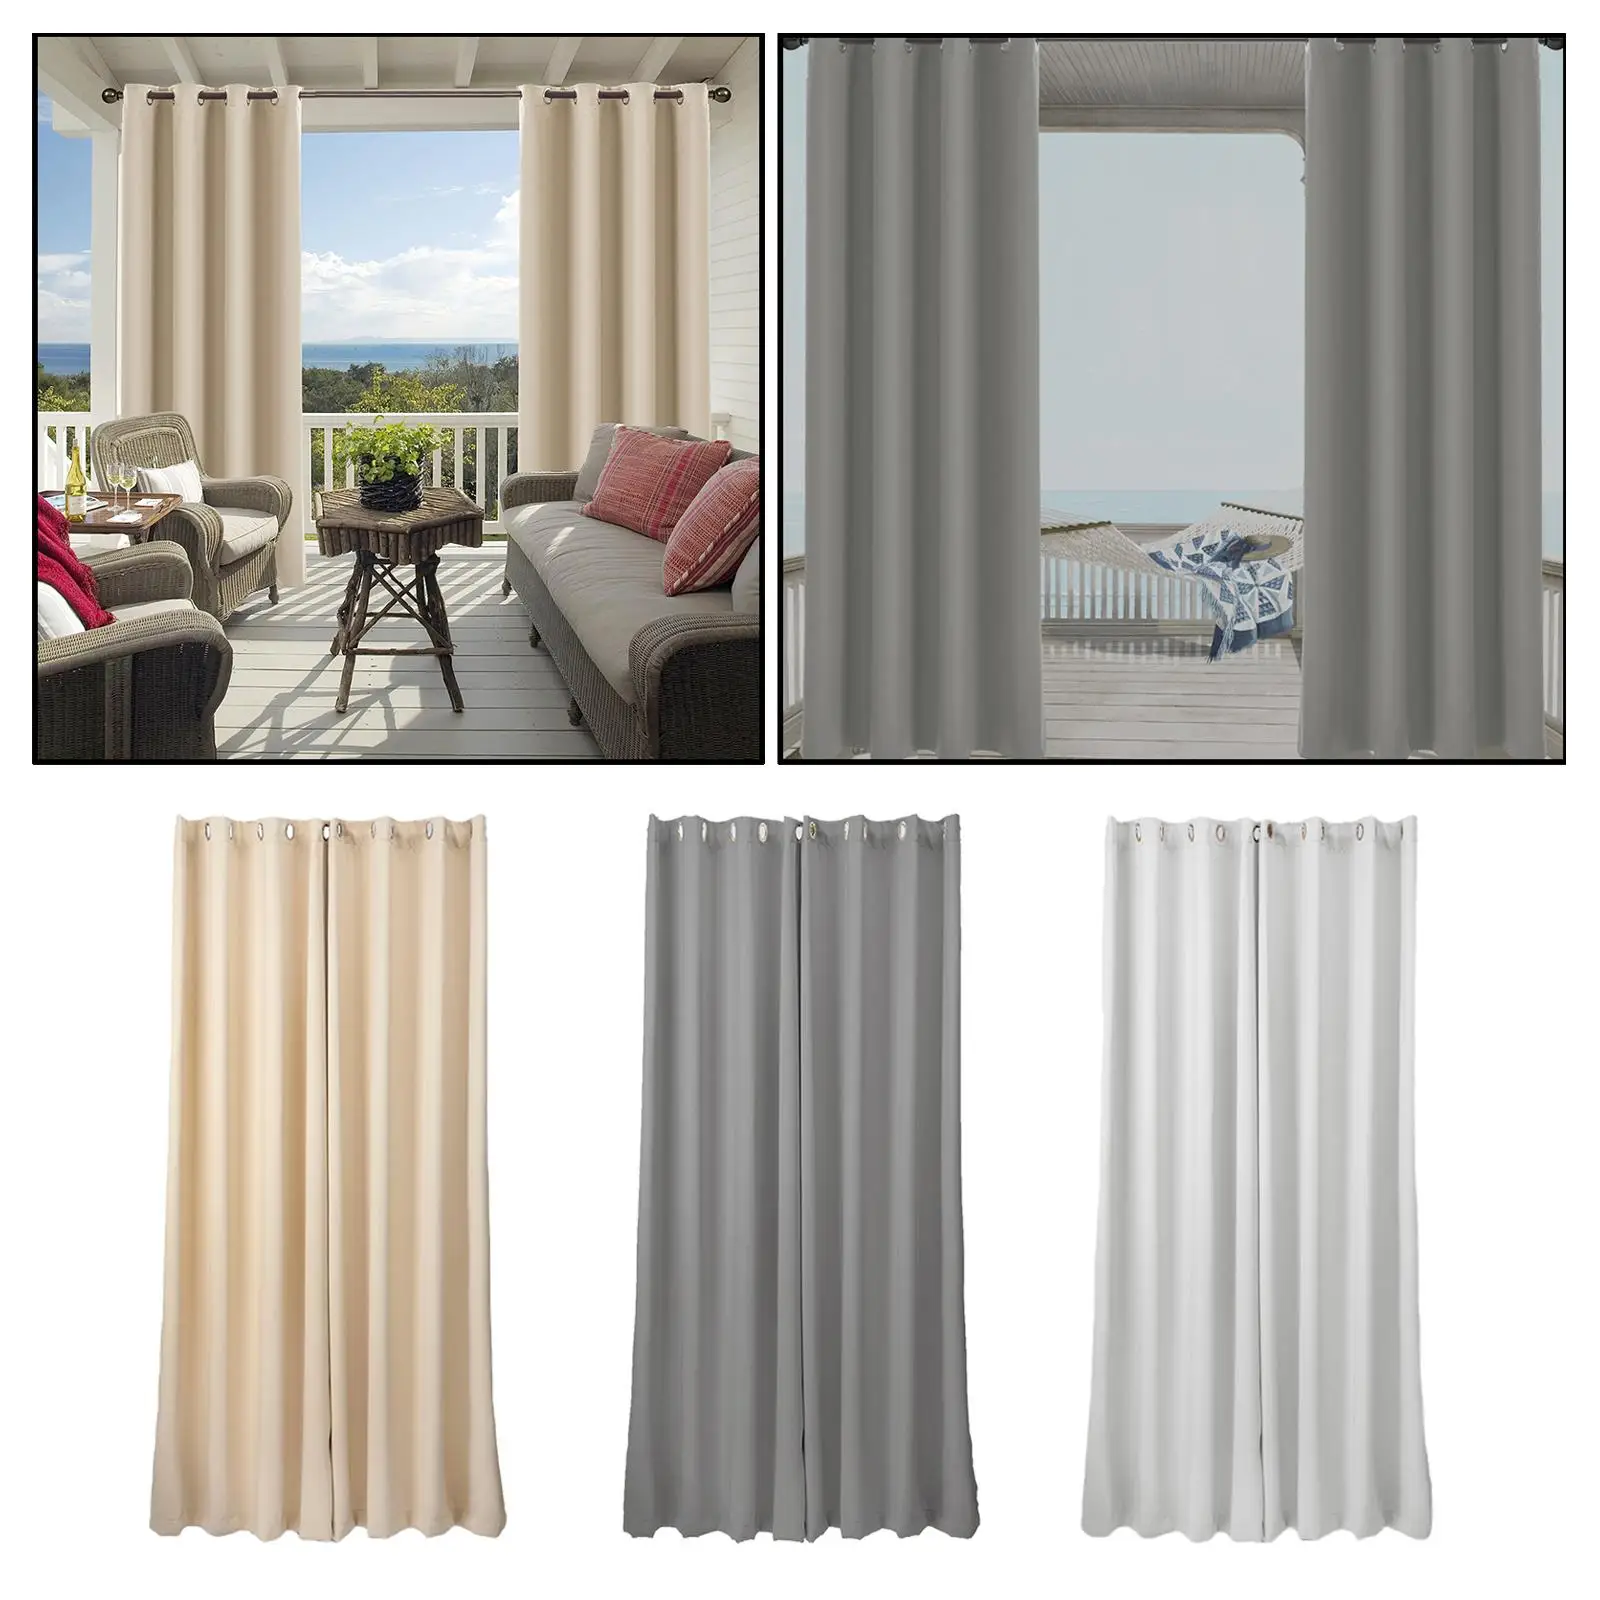 Thermal Outdoor Waterproof Grommet Blackout Window Porch Patio Curtain Panel